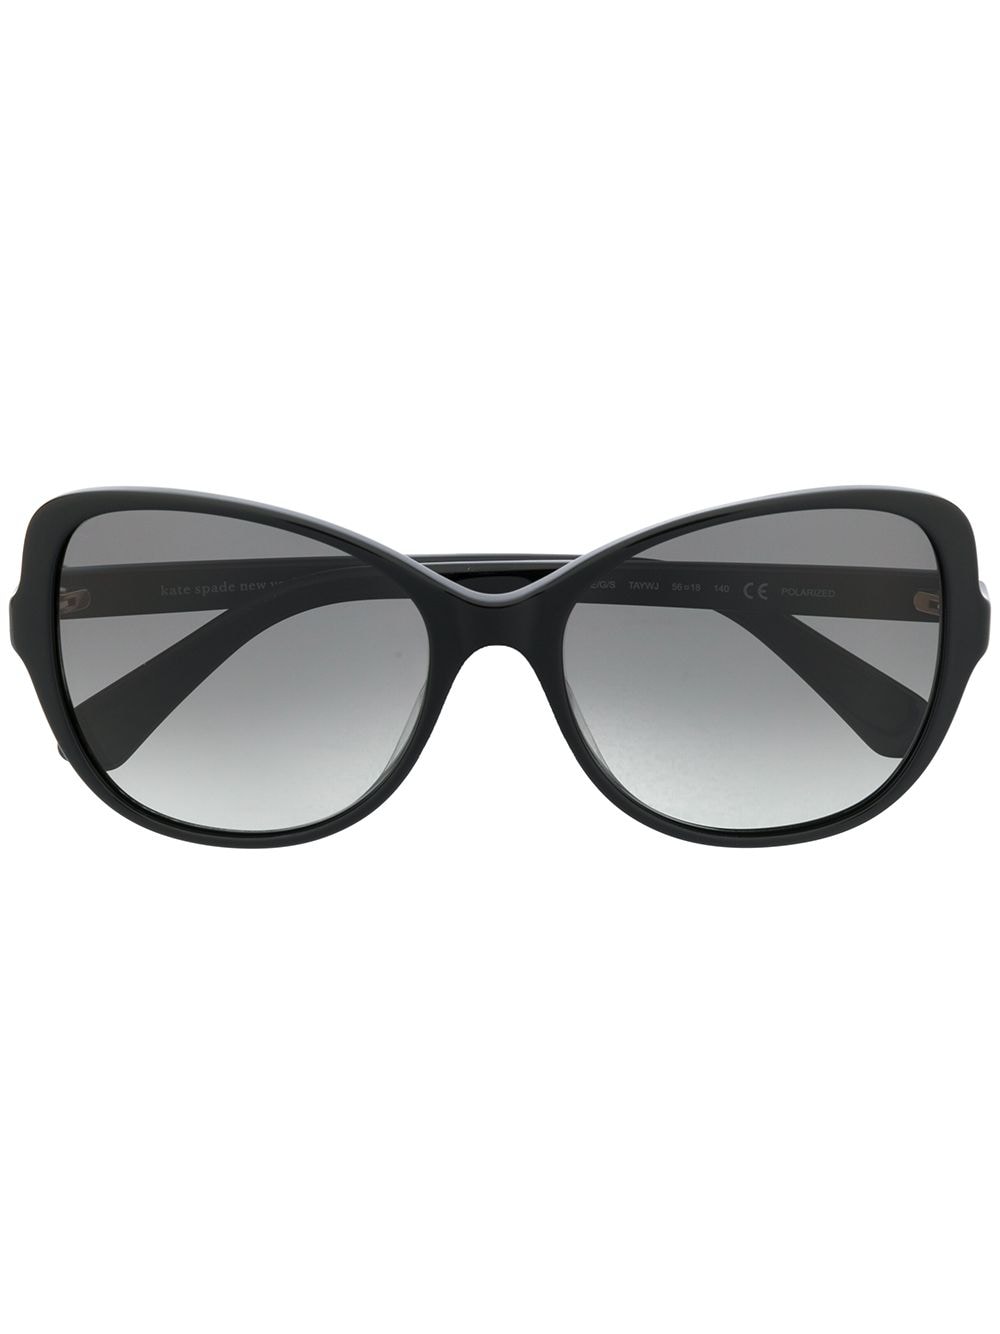 Shop Kate Spade cat-eye frame sunglasses with Express Delivery - FARFETCH